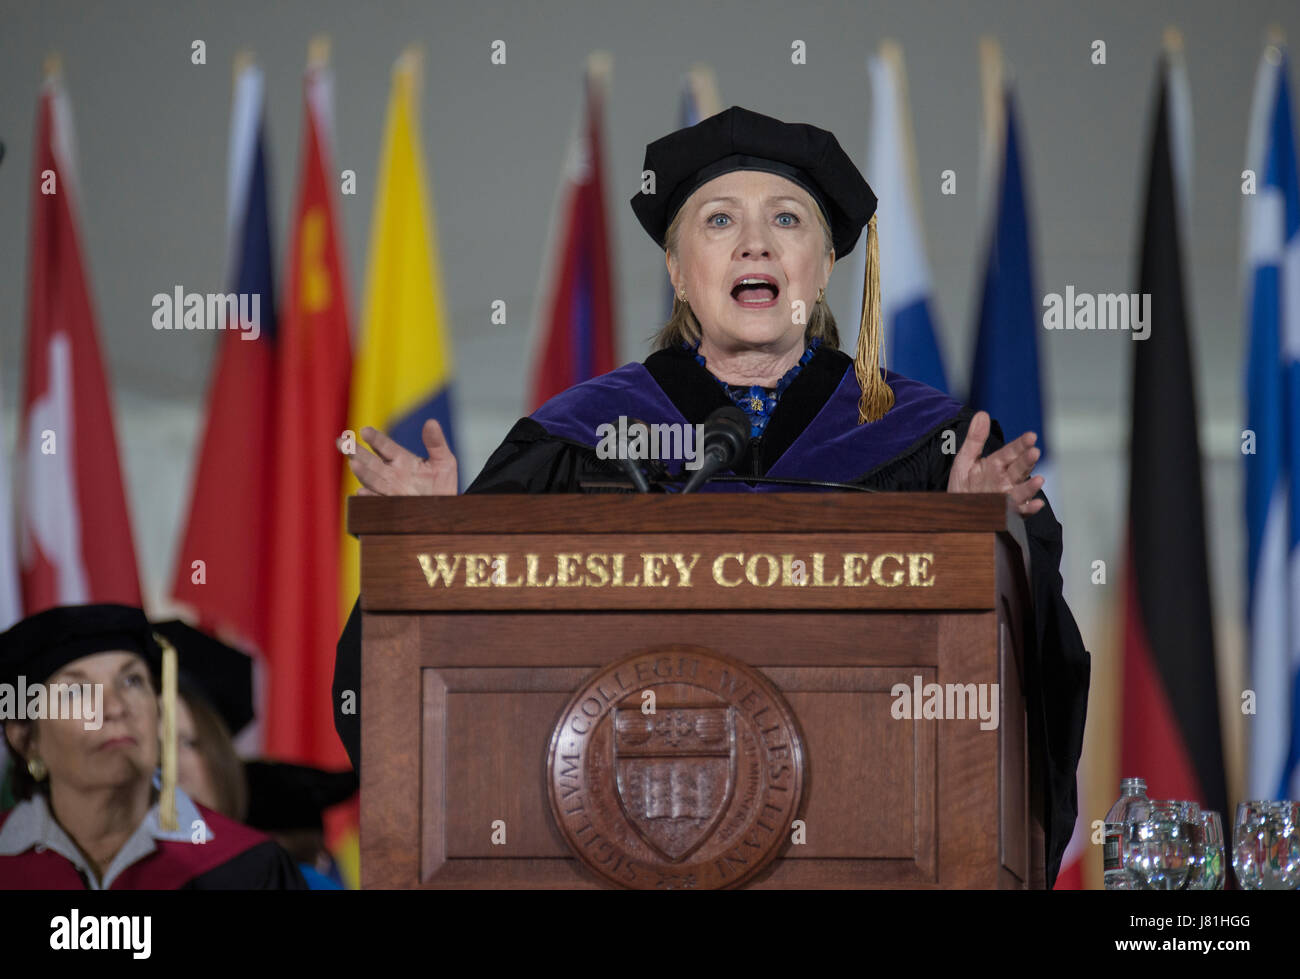 Wellesley, MA, USA. 26th May 2017.  2016 United States Democratic Presidential Candidate Hillary Clinton (Wellesley class of 1969) returned to speak to the 2017 Wellesley College graduating class.  Former First lady, Secretary of State and U.S. senator from the state of New York returned to speak during the 2017 Wellesley College commencement forty-eight years after she gave the first commencement speech in 1969 as a student. Credit Chuck Nacke / Alamy Live News Stock Photo